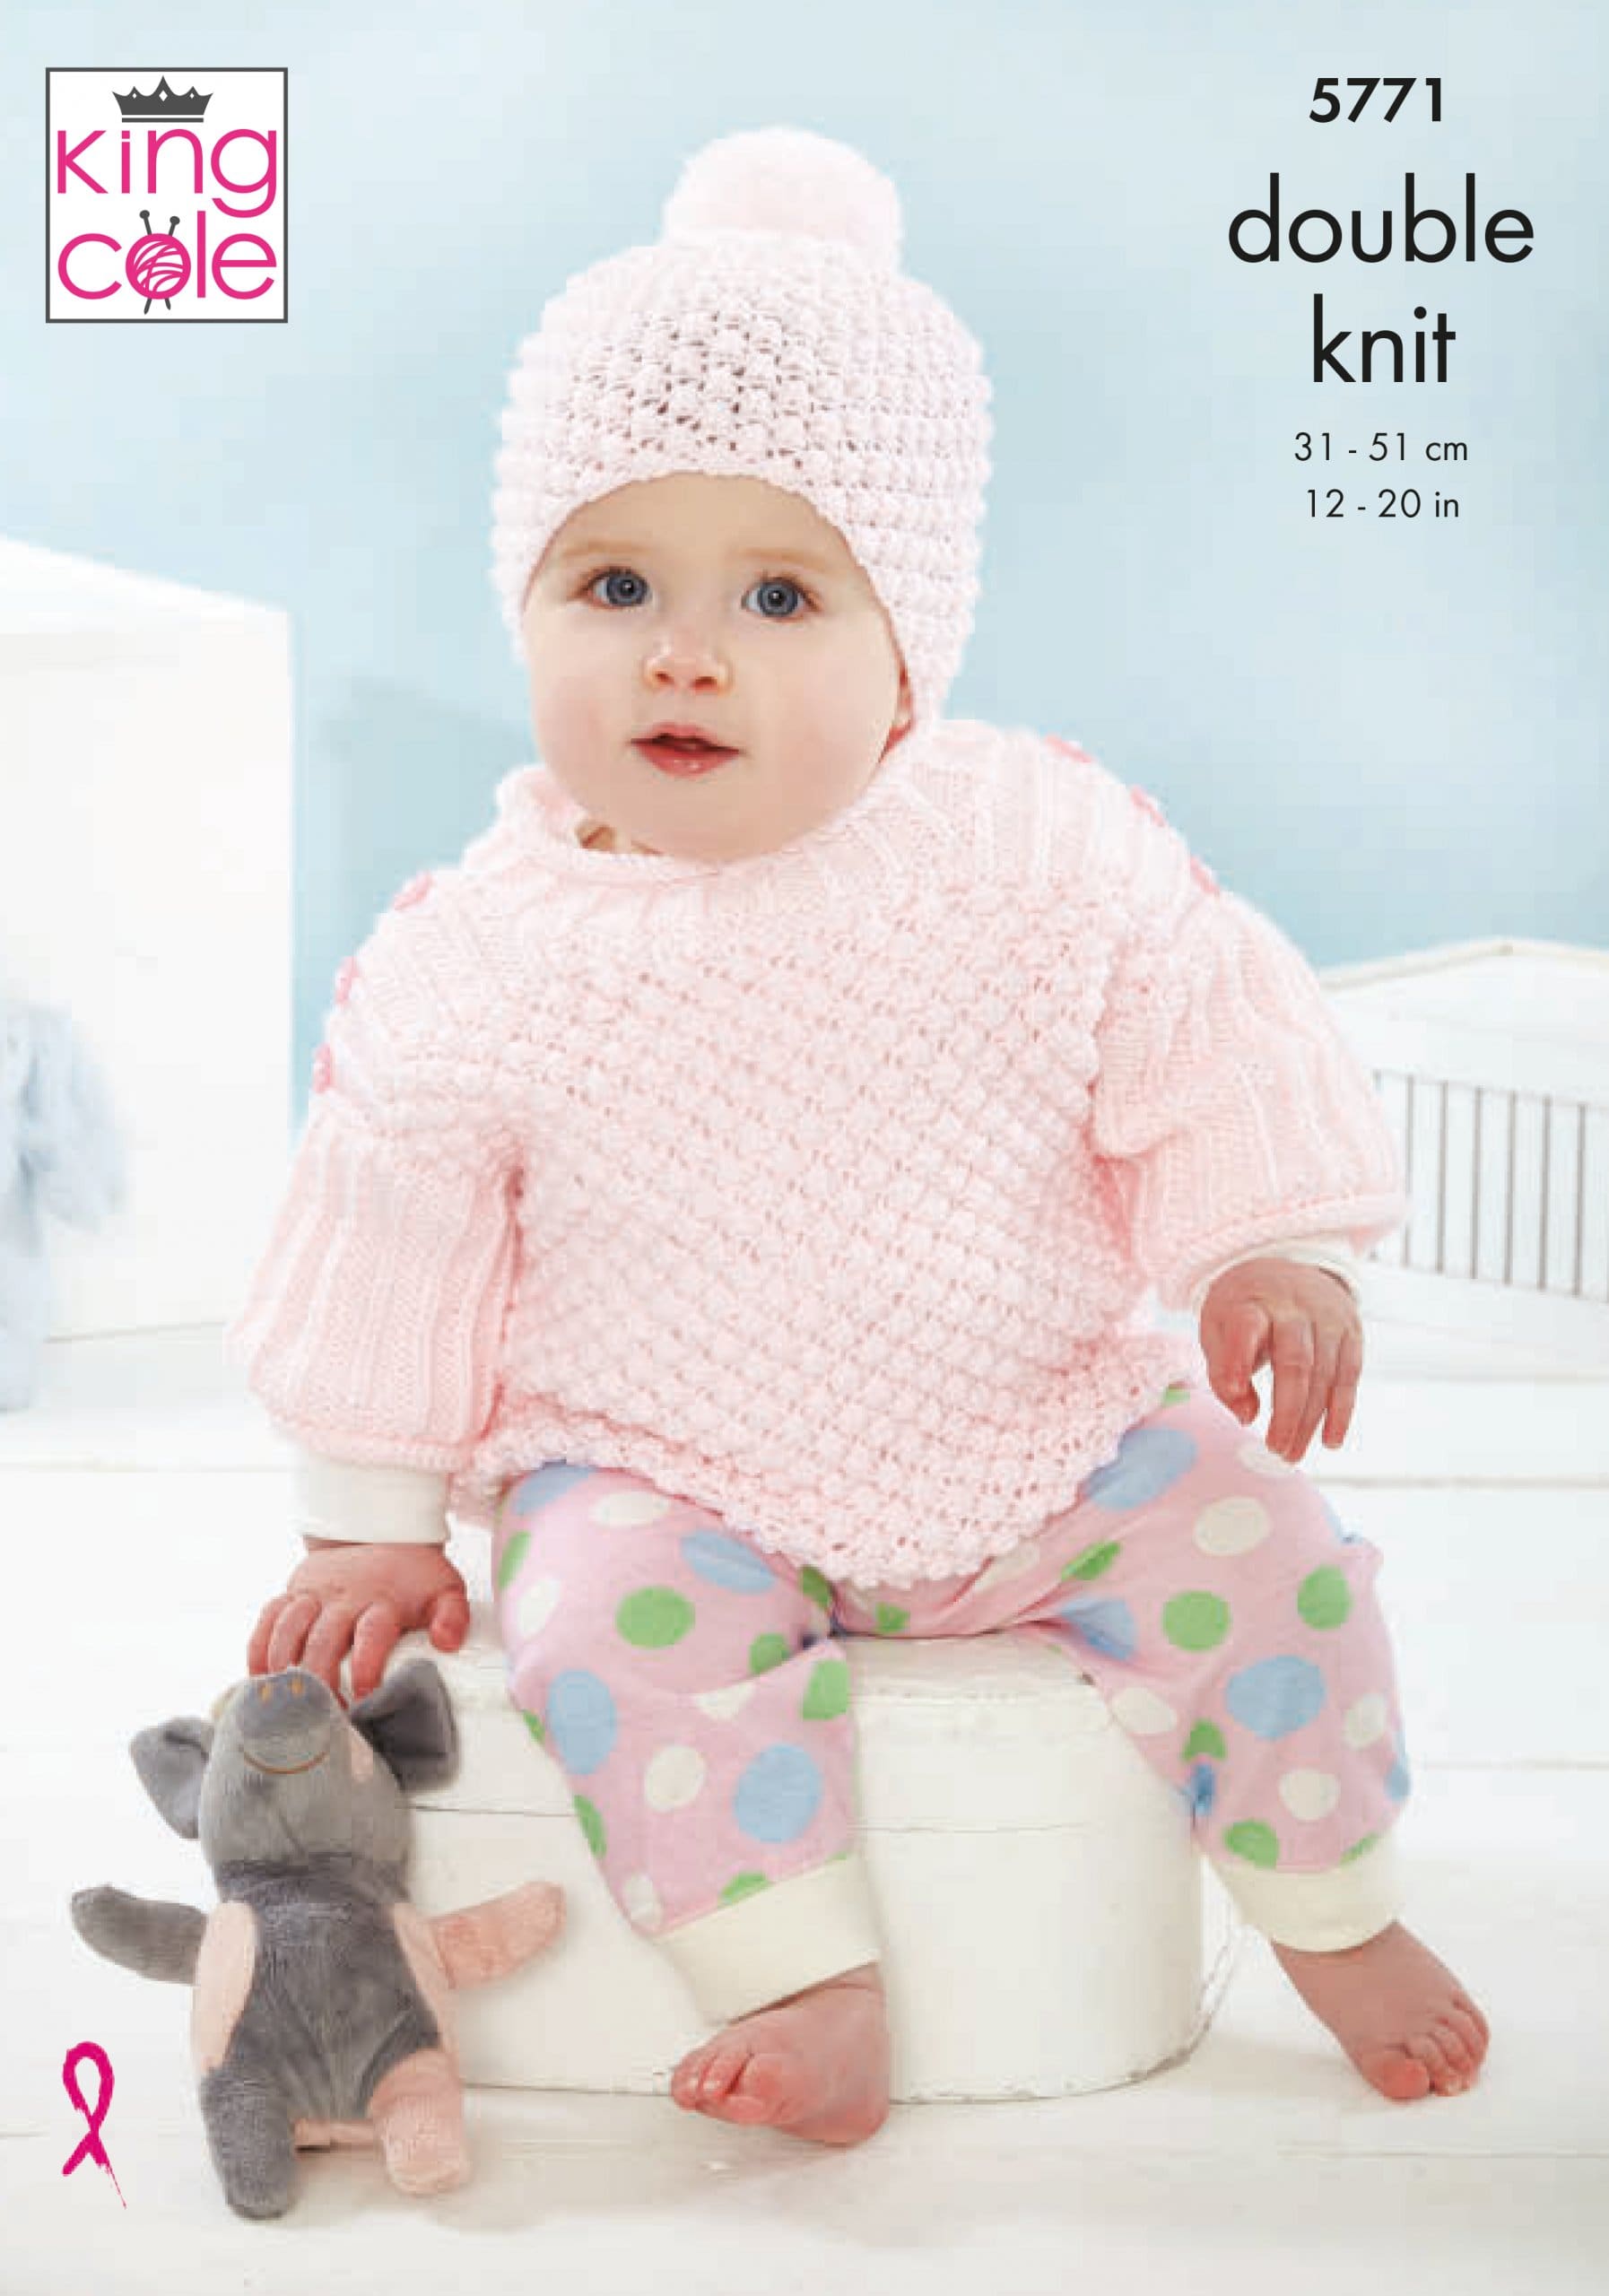 Easy to Follow Coat, Top & Hats Knitted in Baby Safe DK Knitting ...